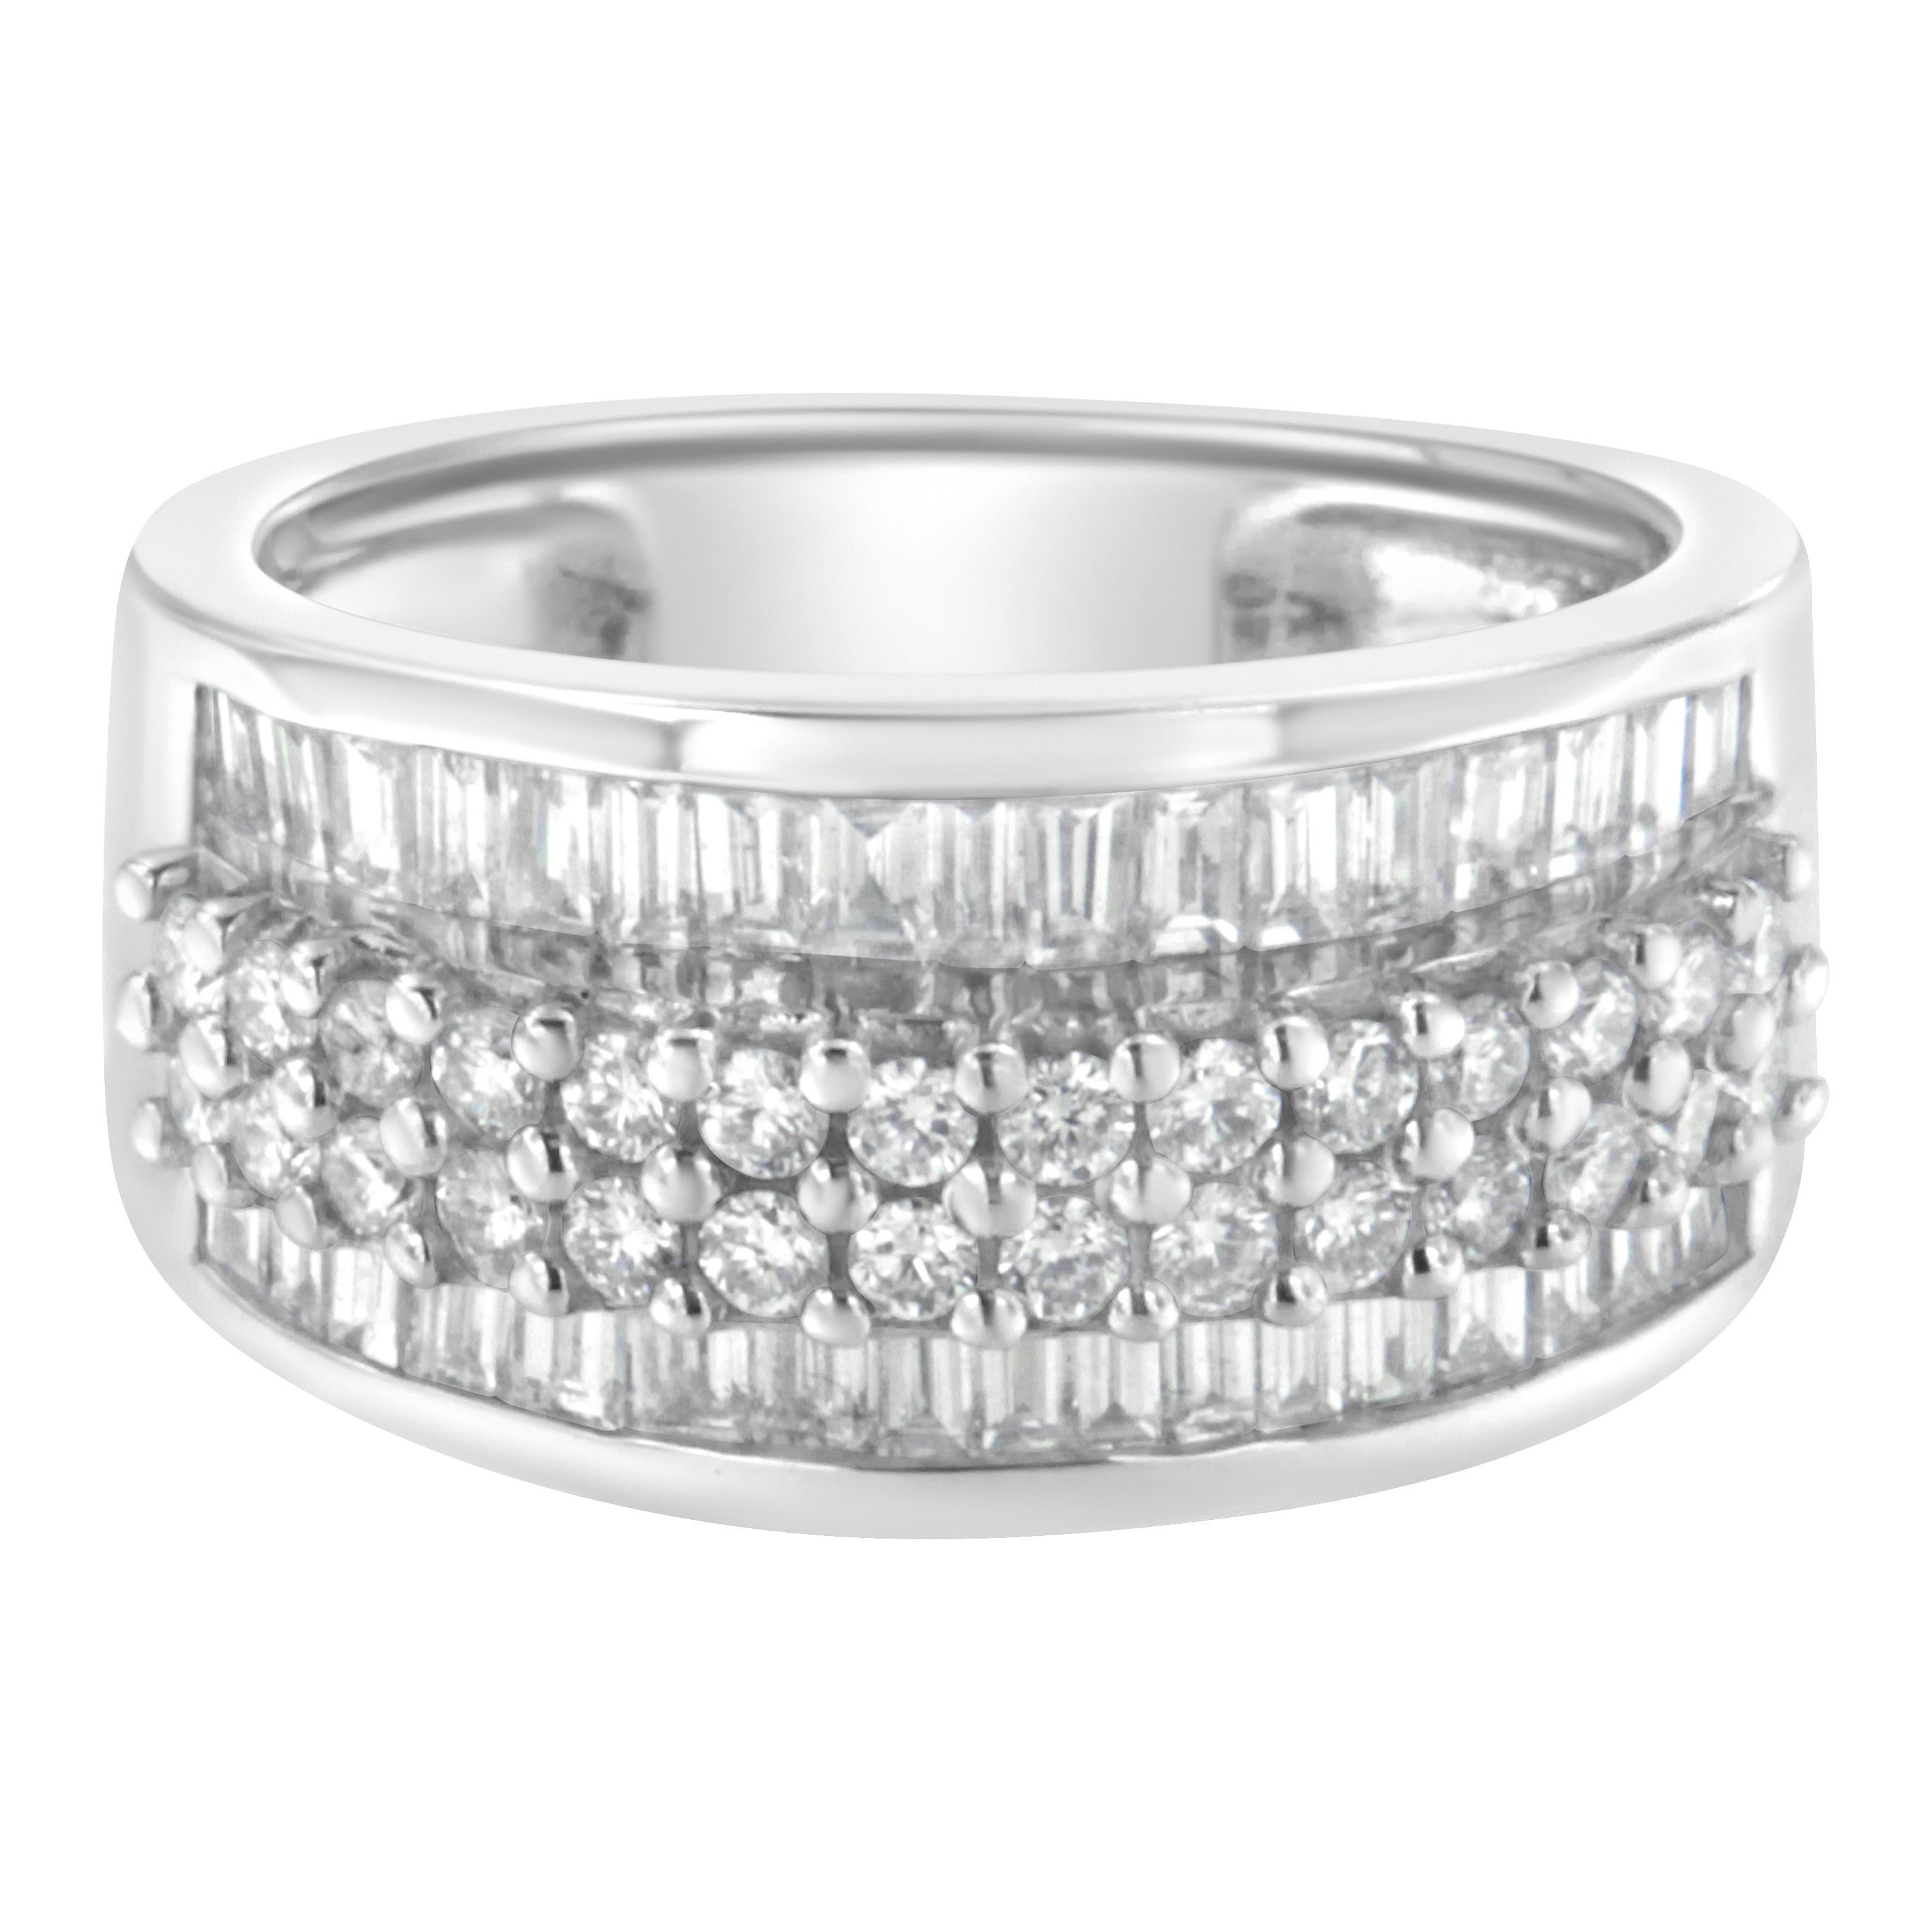 For Sale:  14K White Gold 1 1/2 Carat Round and Baguette Diamond Ring 5